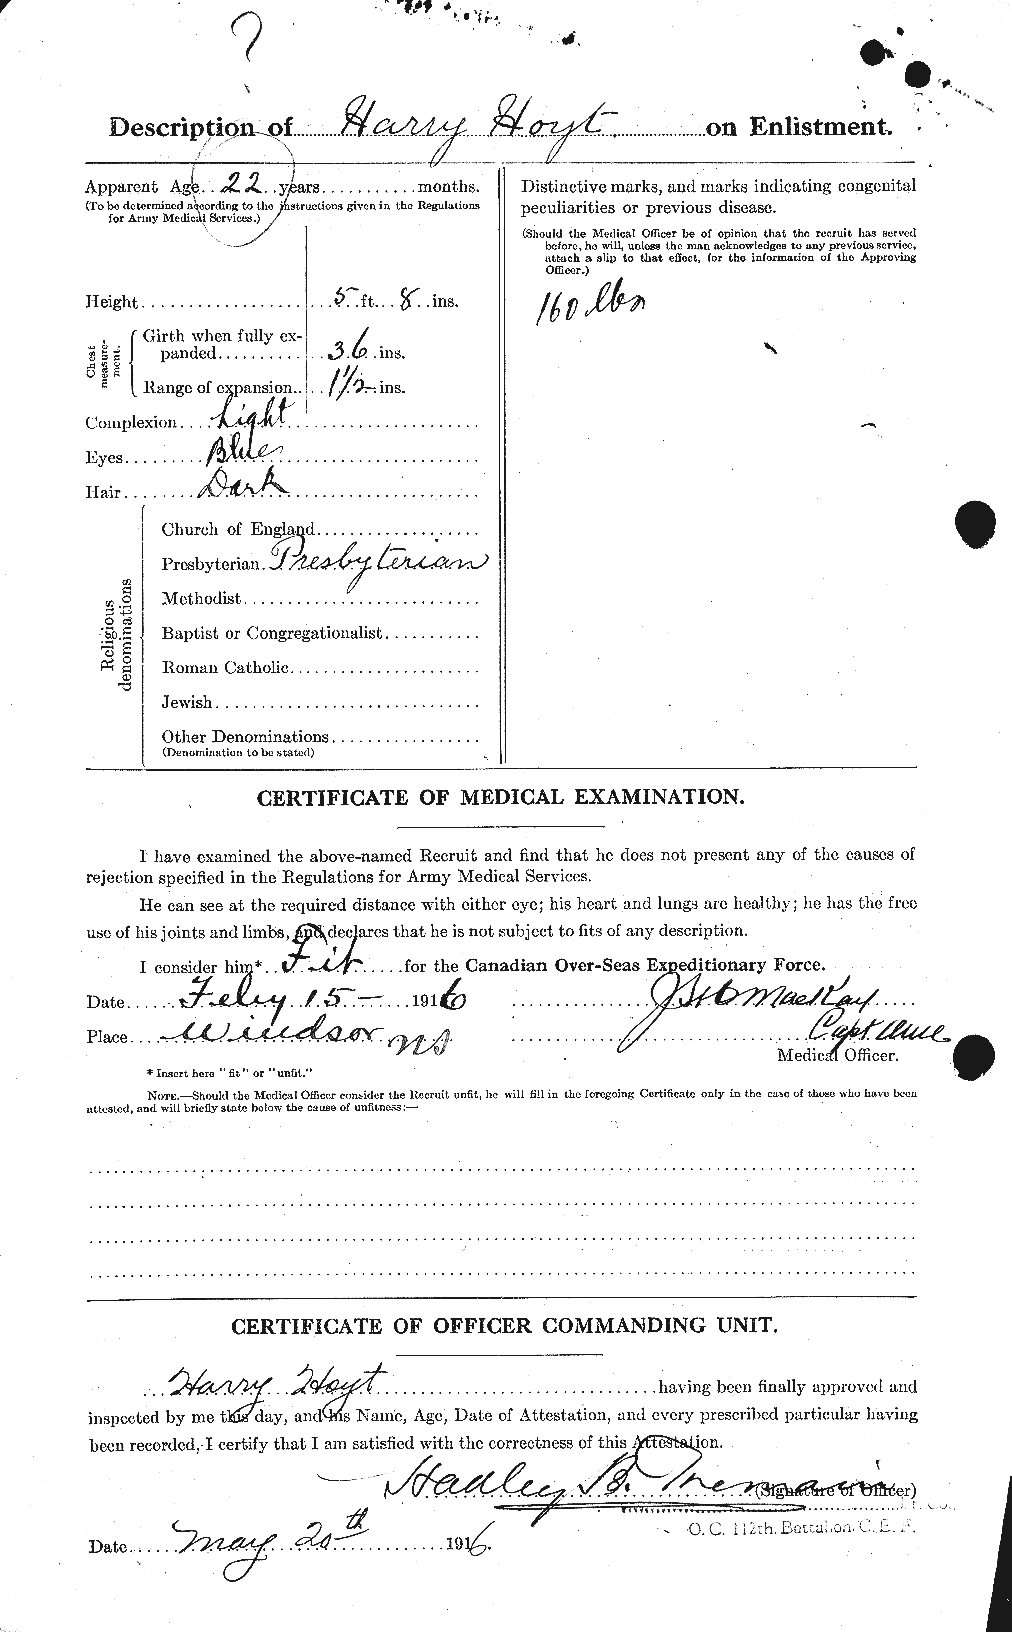 Personnel Records of the First World War - CEF 403579b